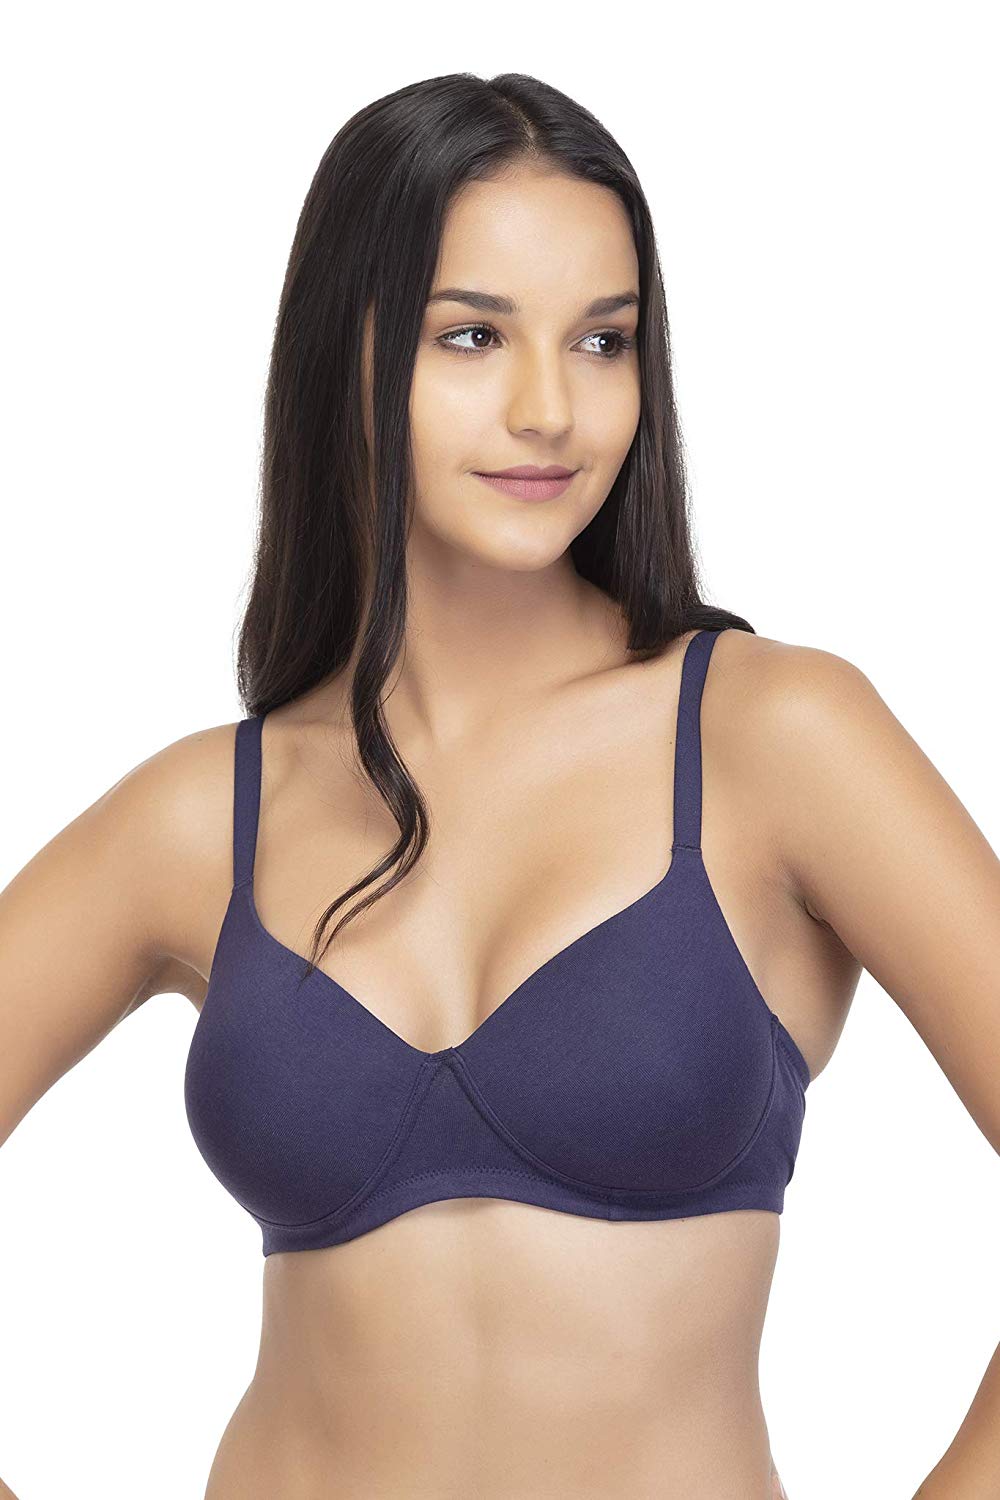 Cotton Blend Seamed Non Padded Women's Full Coverage Bra C & D Cup  Non-Padded Super PC Fabric Daily Use Bras | Breathable Bras | Everyday Bras  